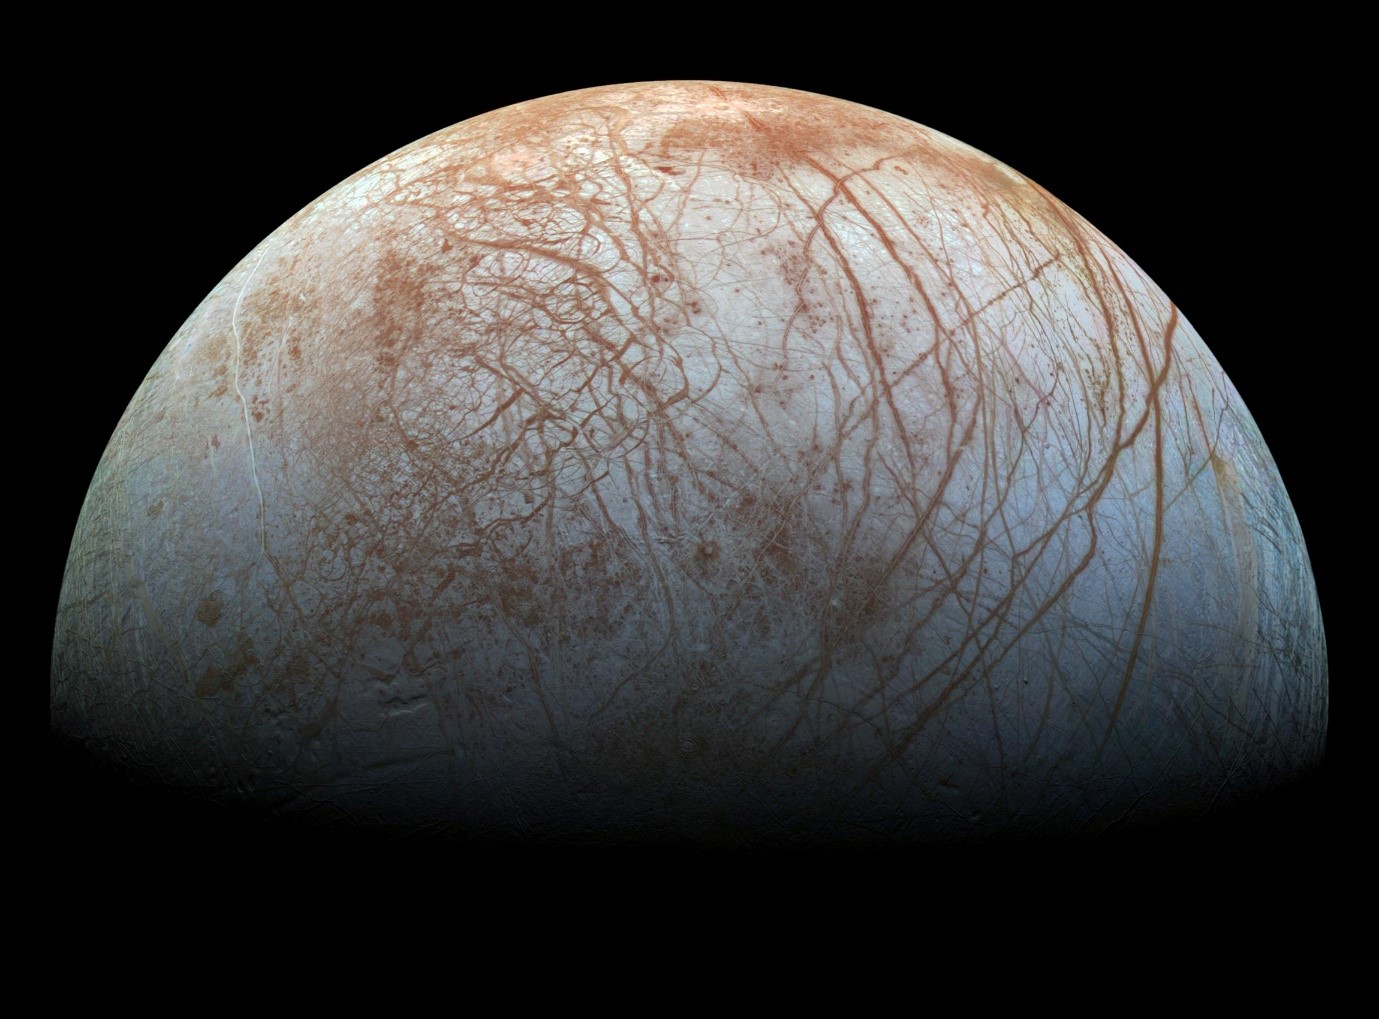 Jupiter’s moon Europa, imaged by NASA’s Galileo spacecraft in the late 1990s